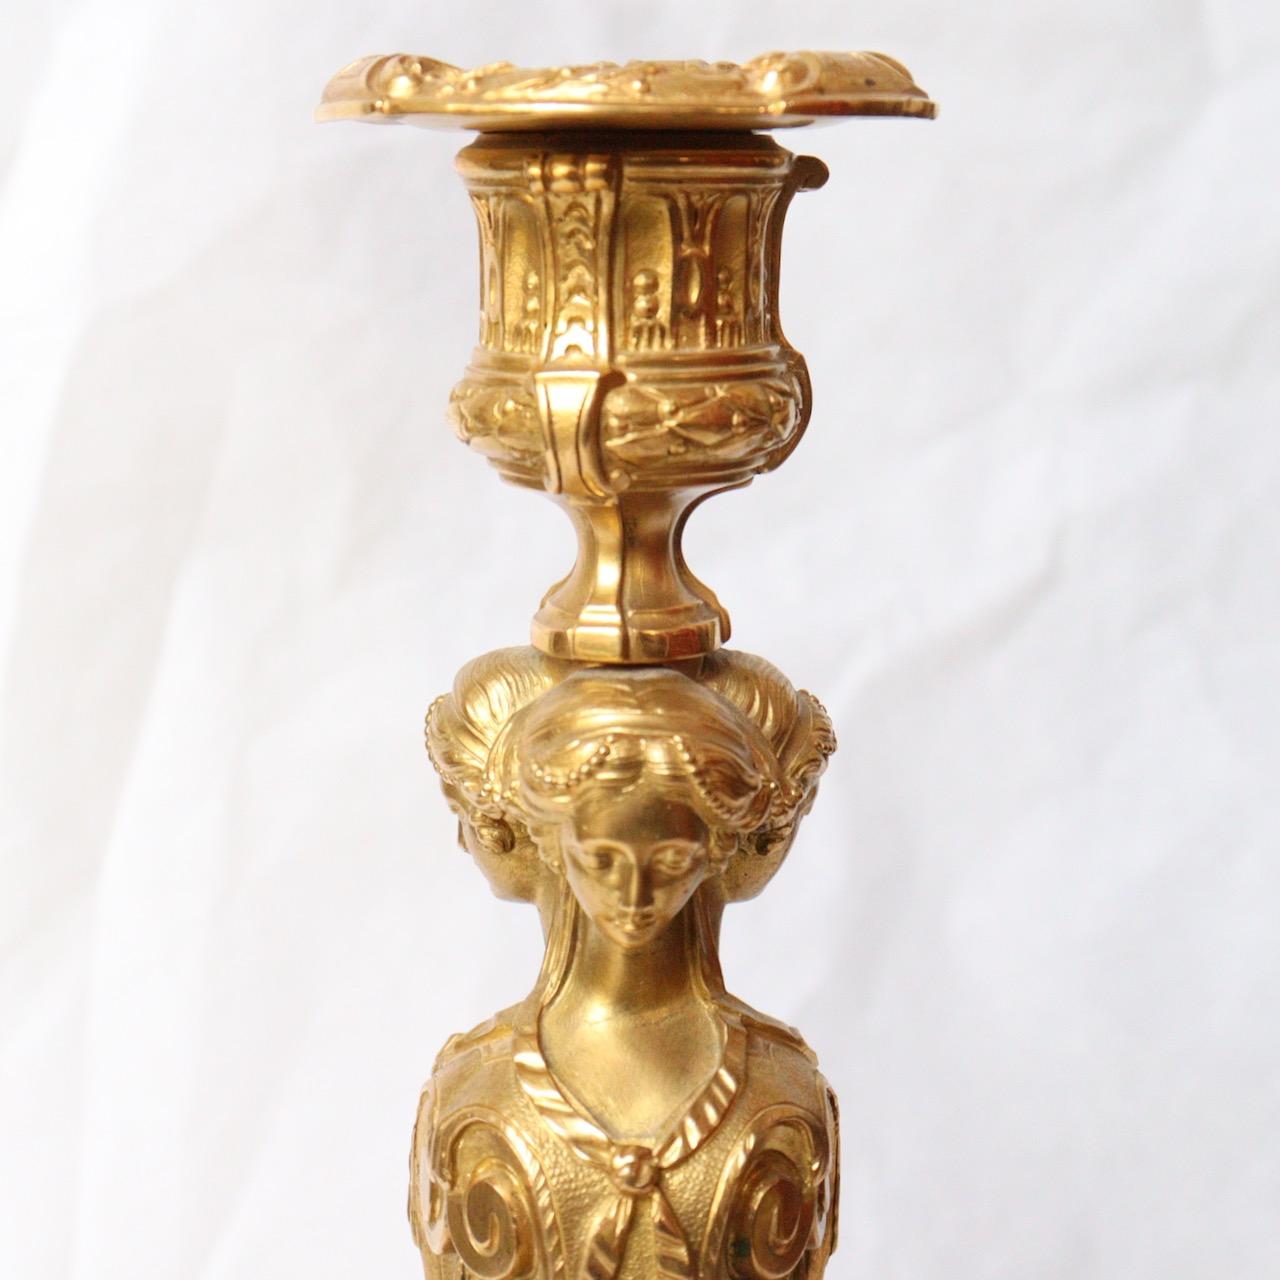 A Pair of Second Half 19th Century French Ormolu Louis XVI Style Candlesticks  5